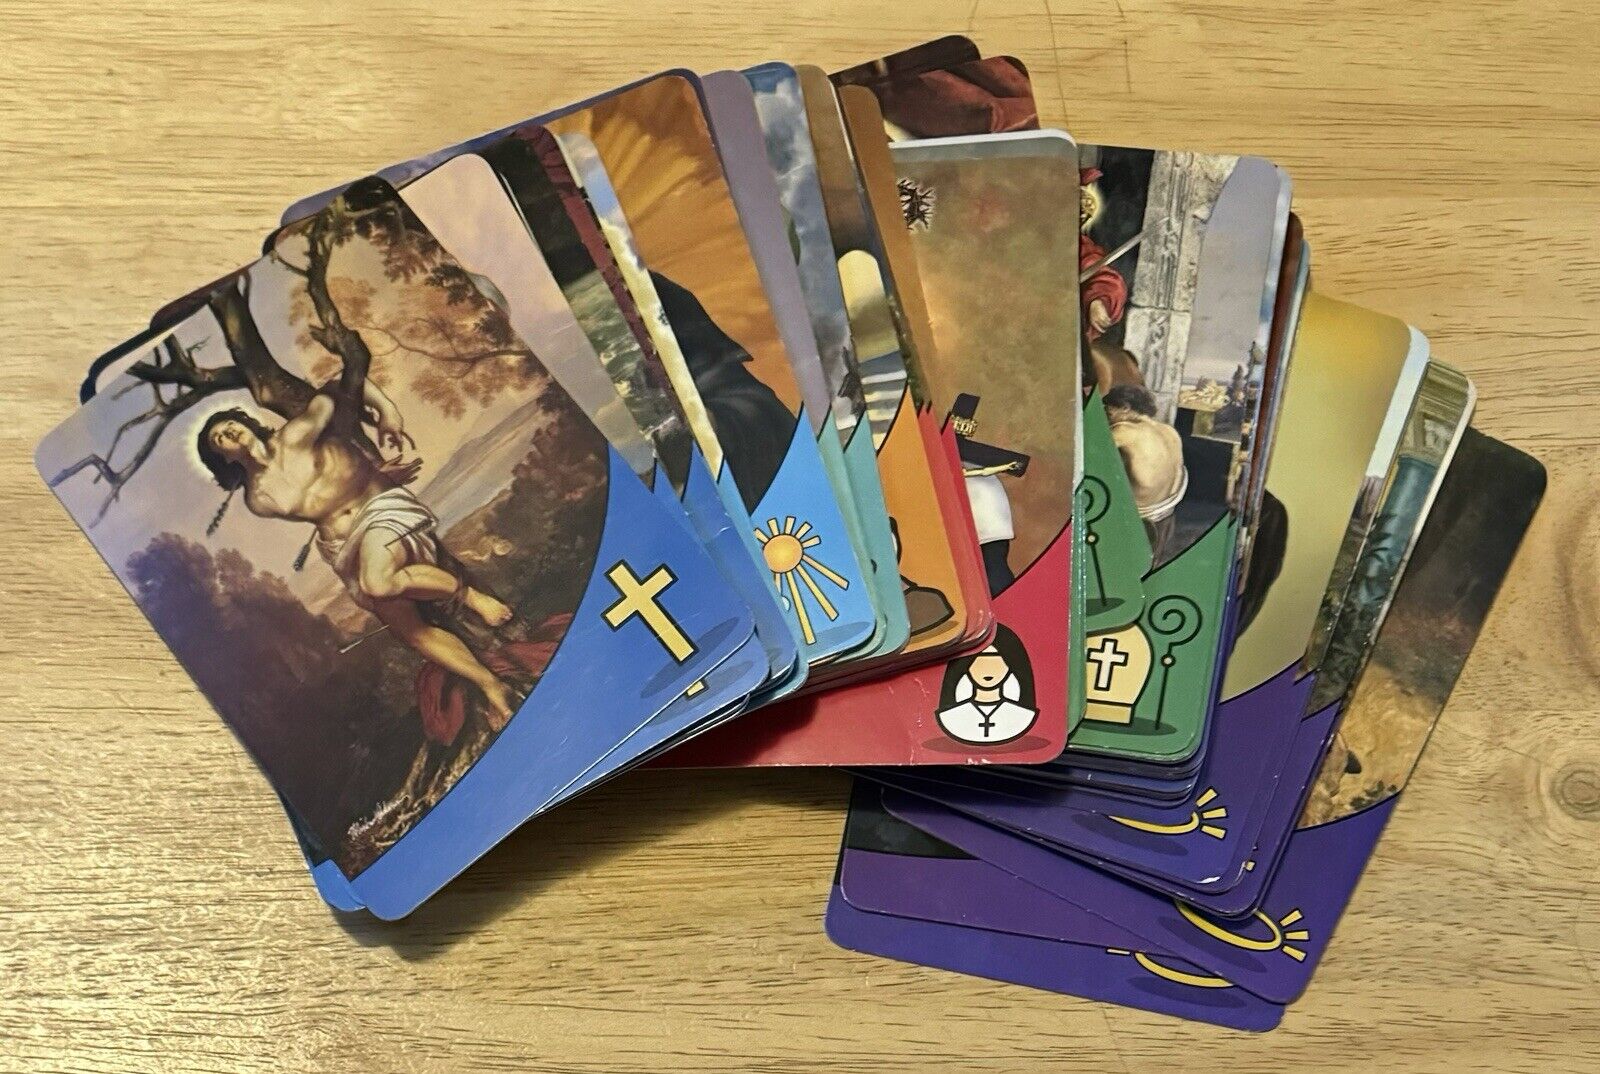 Vintage Christian Religious Art Cards - 95 Cards Total